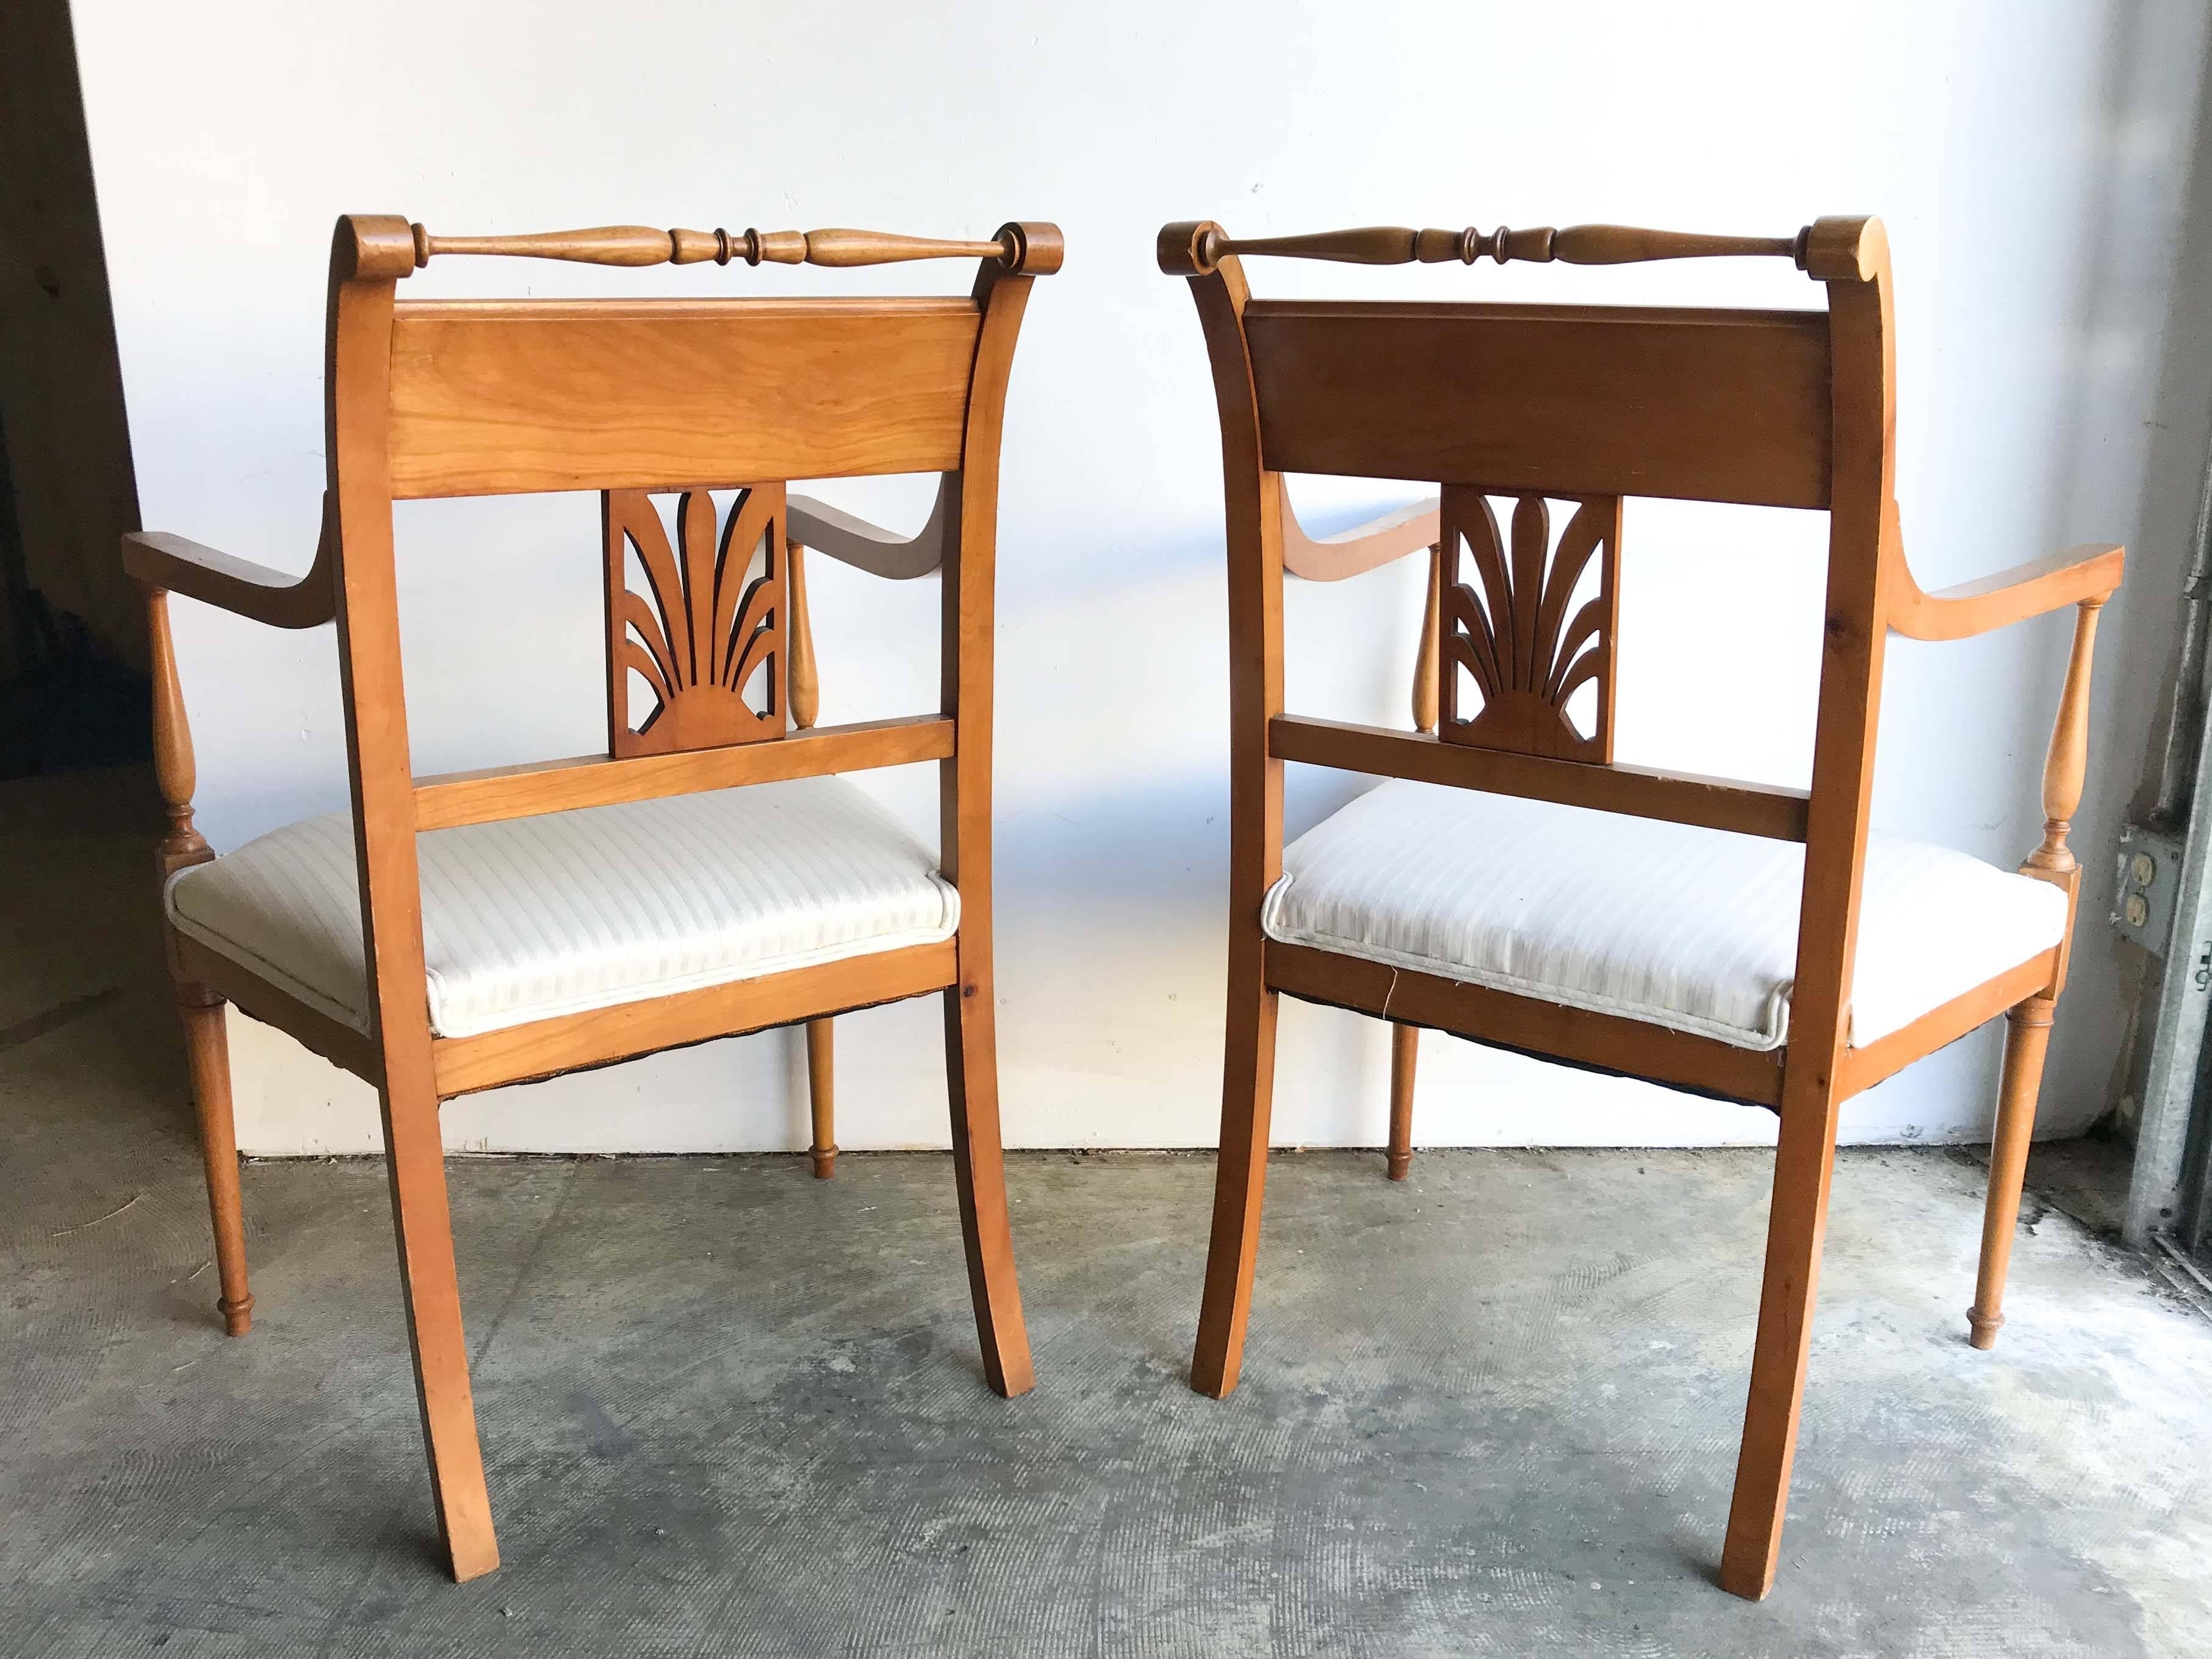 Pair of Biedermeier-style armchairs with ebony inlay. Turned legs and carved backsplat, wonderful condition with minor wear consistent with age and use.